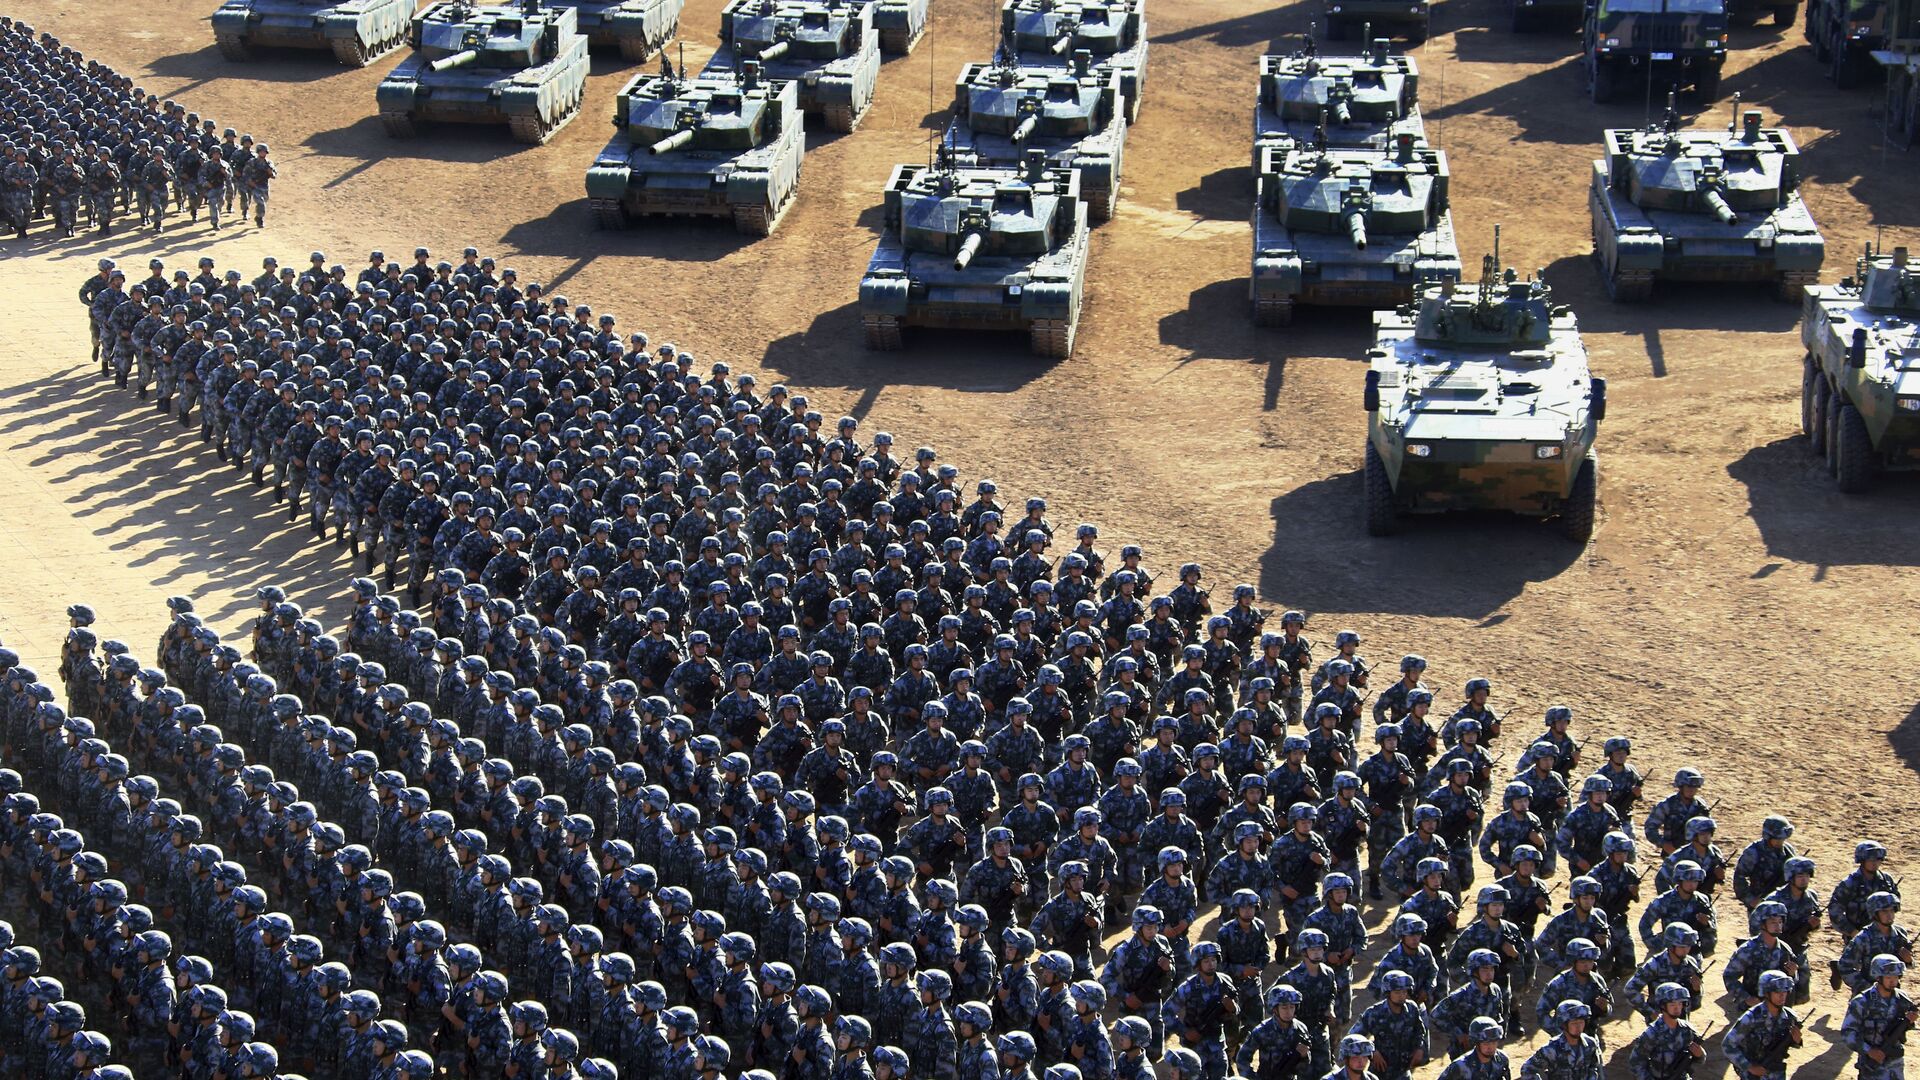 In this photo released by China's Xinhua News Agency, Chinese People's Liberation Army (PLA) troops march past military vehicles Sunday, July 30, 2017 as they arrive for a military parade to commemorate the 90th anniversary of the founding of the PLA on Aug. 1 at Zhurihe training base in north China's Inner Mongolia Autonomous Region - Sputnik International, 1920, 08.06.2021